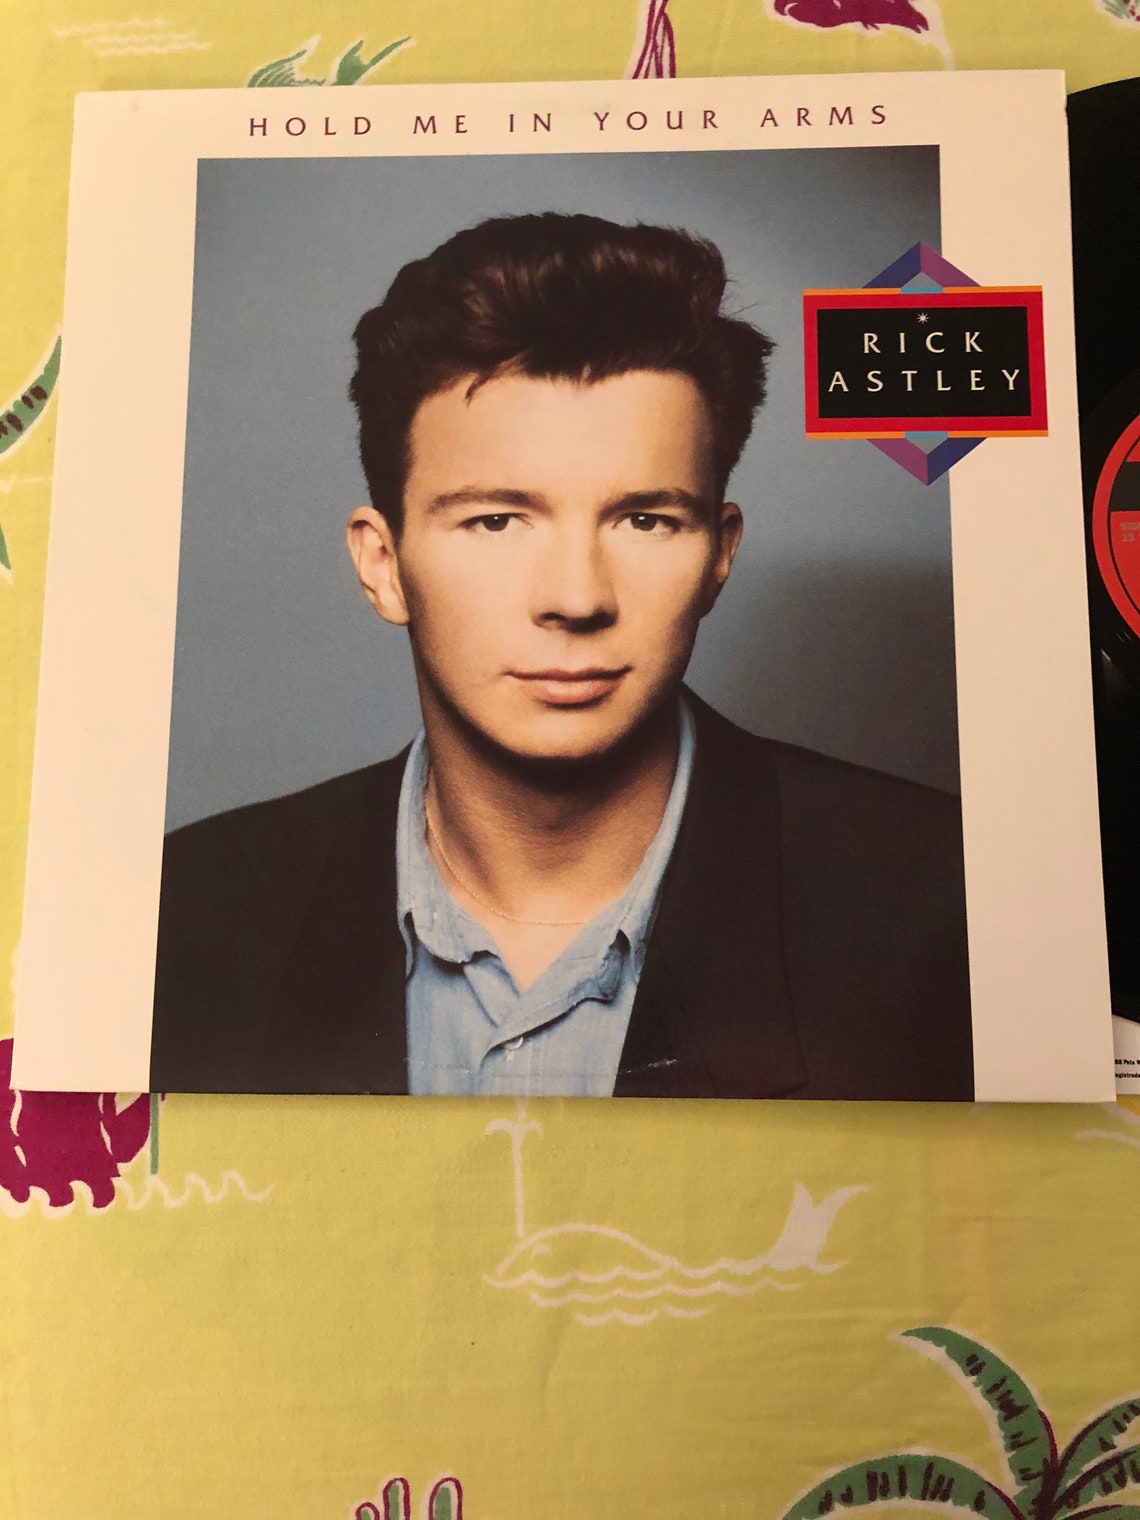 Vintage Rick Astley Hold Me in Your Arms Vinyl LP Record Album | Etsy